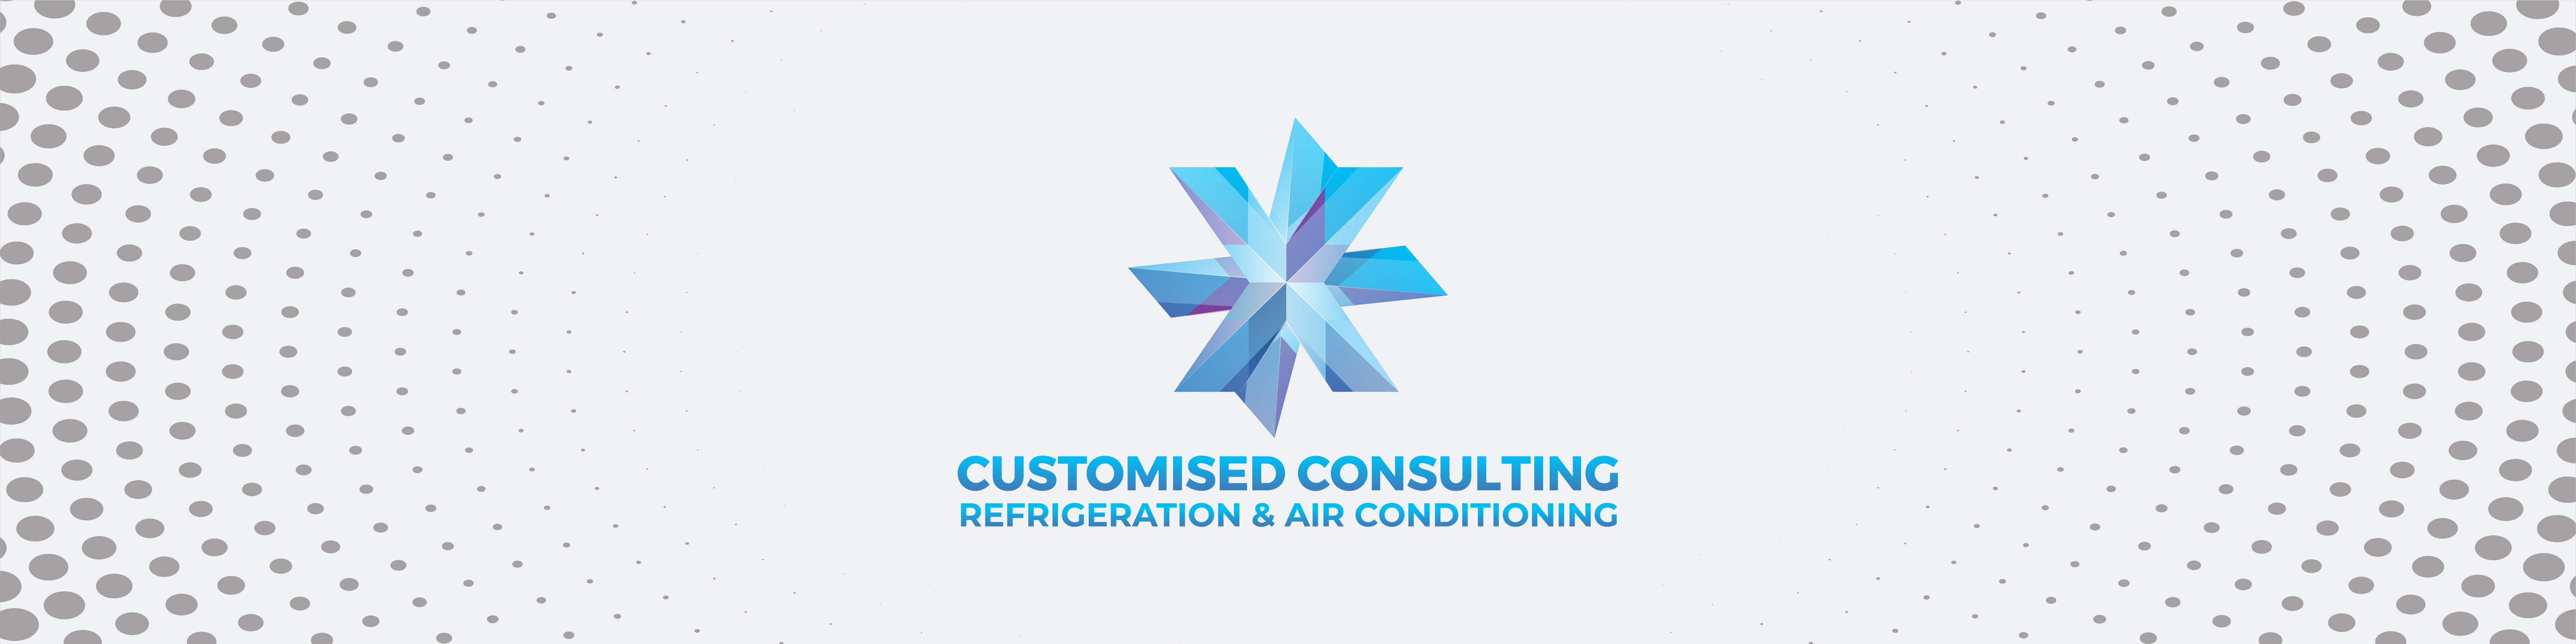 Customised Consulting Air Conditioning Services